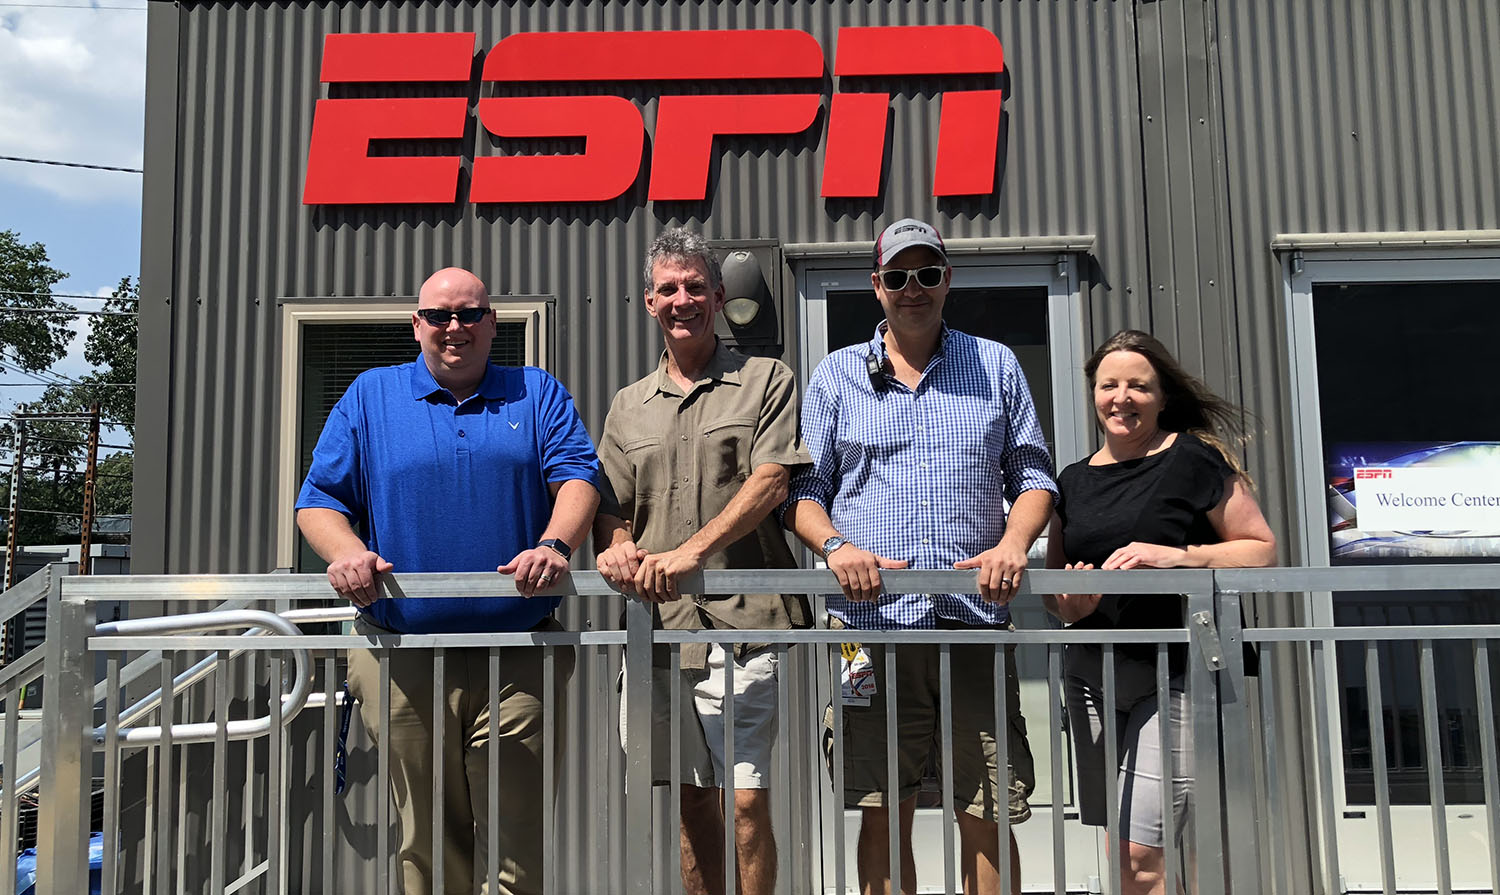 Live From the US Open ESPN Operation Is Bigger Than Ever, Has Plenty of New Tech Toys